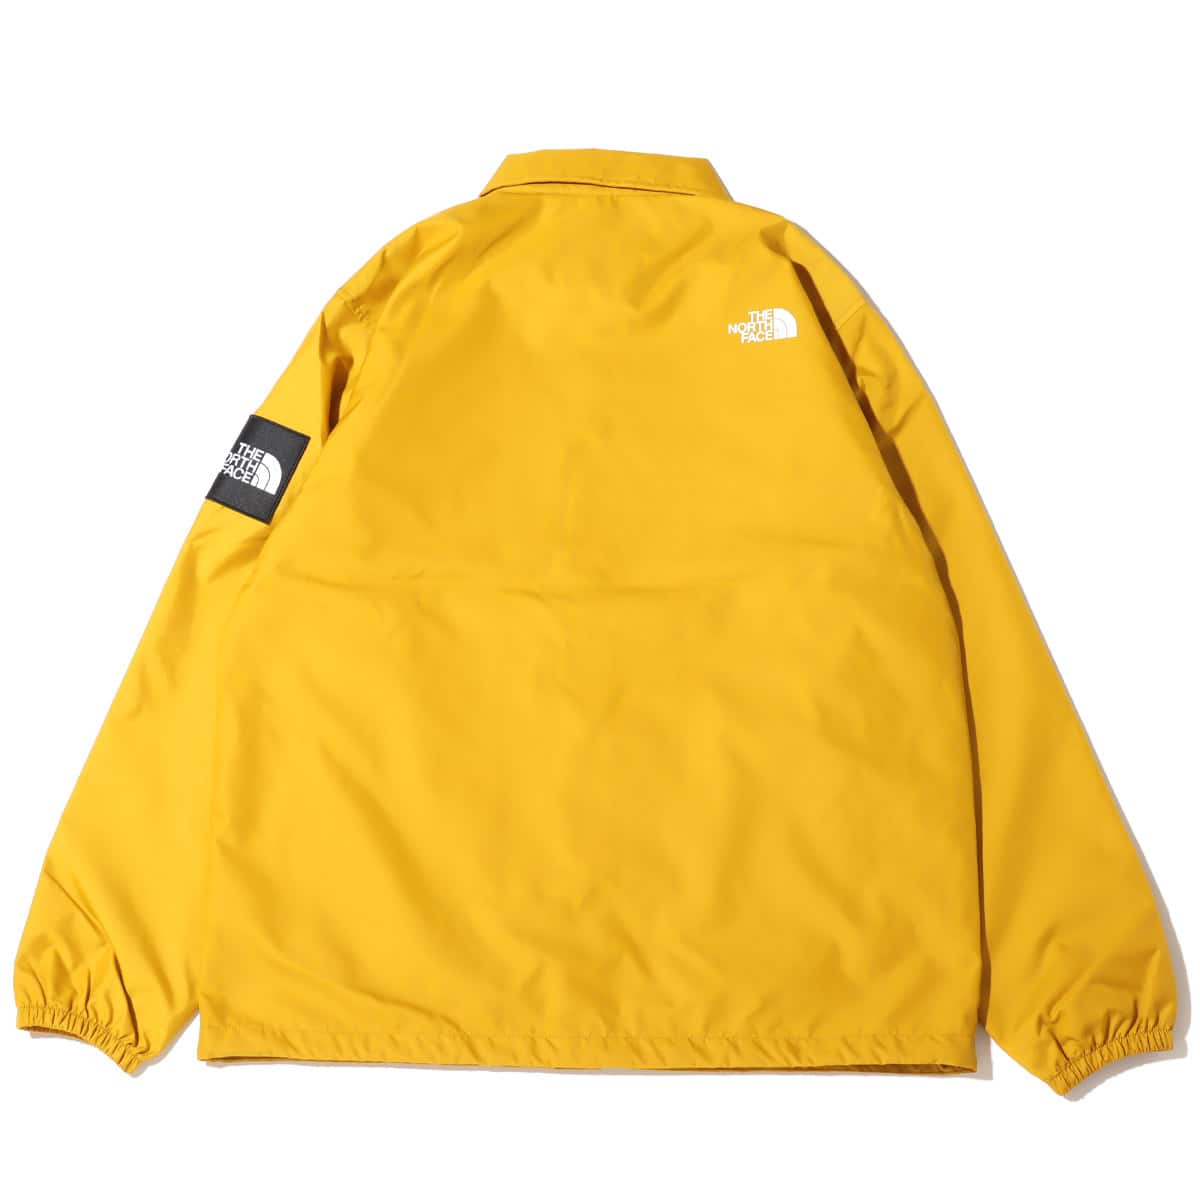 THE NORTH FACE ナイロンコーチジャケット　イエロー